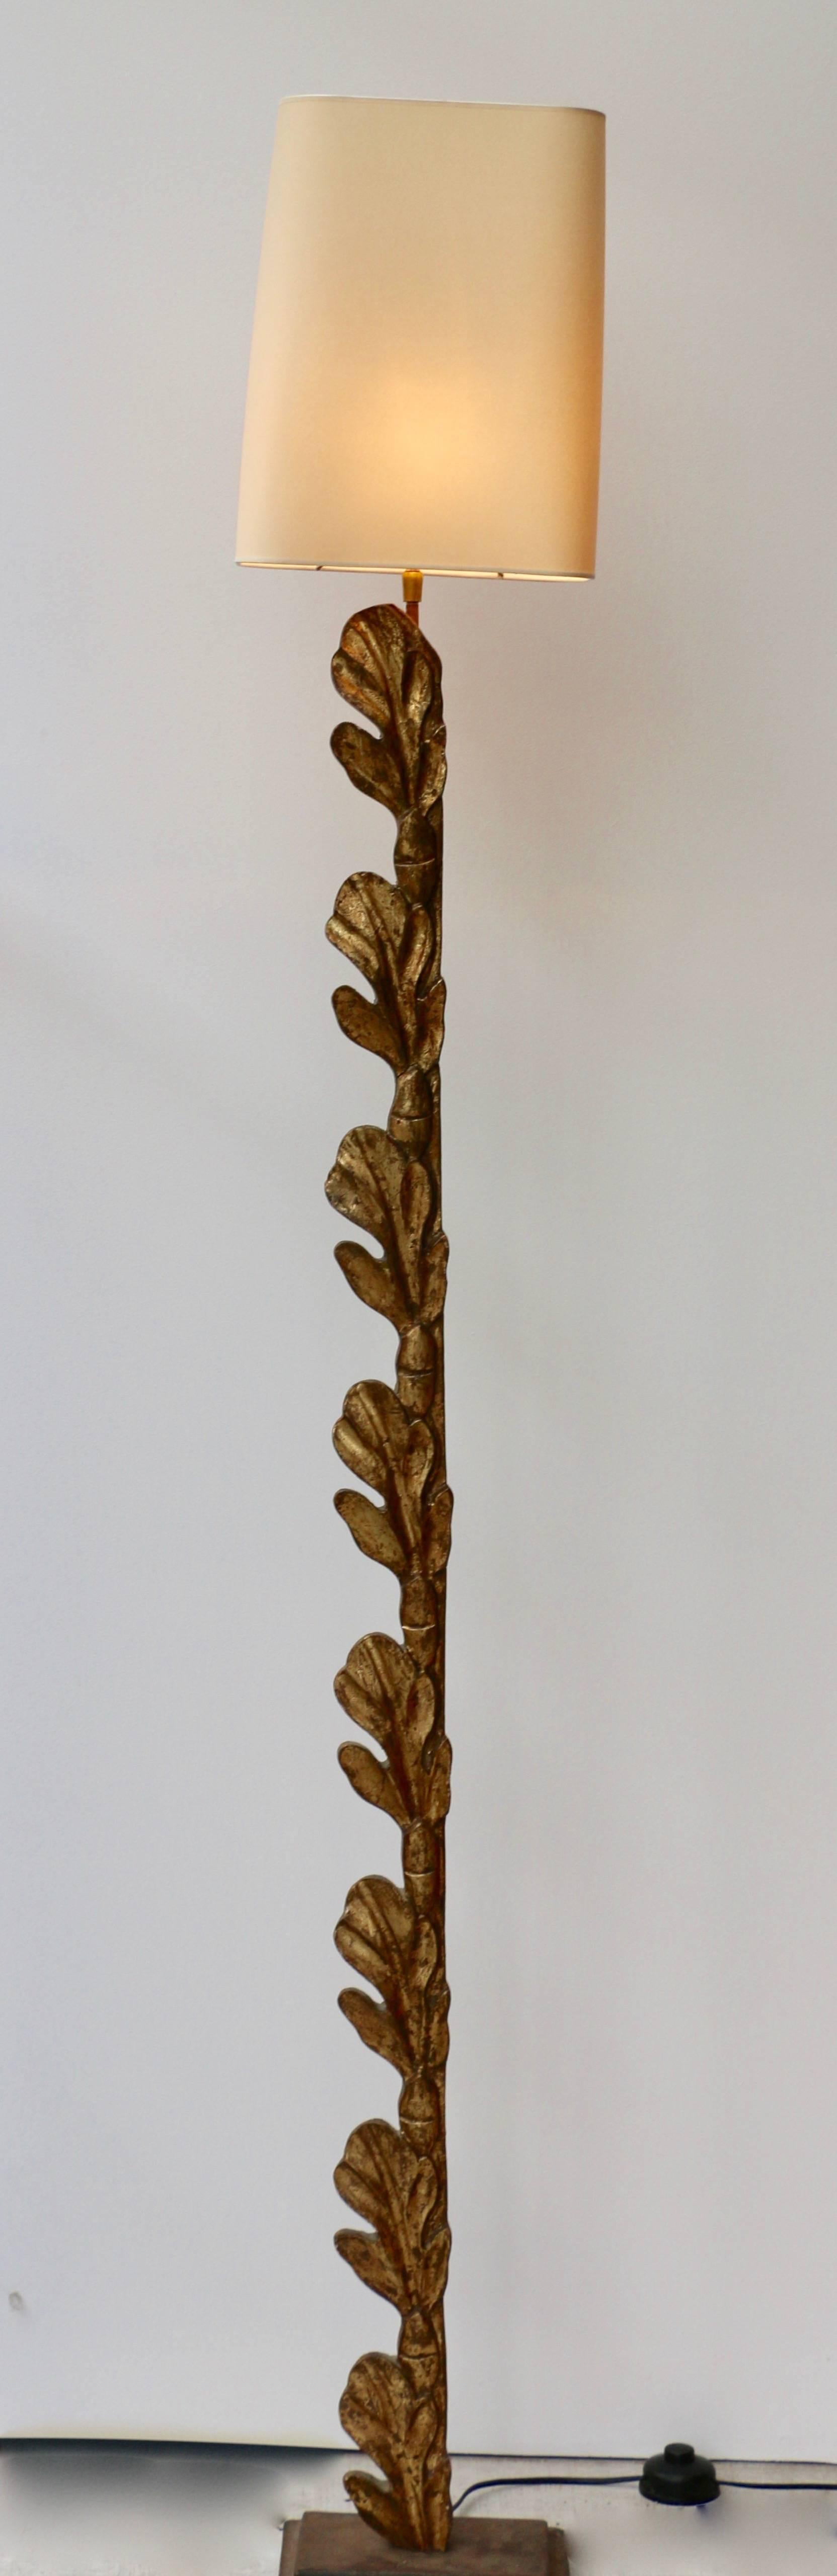 Pair of 1980s floor lamps in giltwood with a foliage decor.